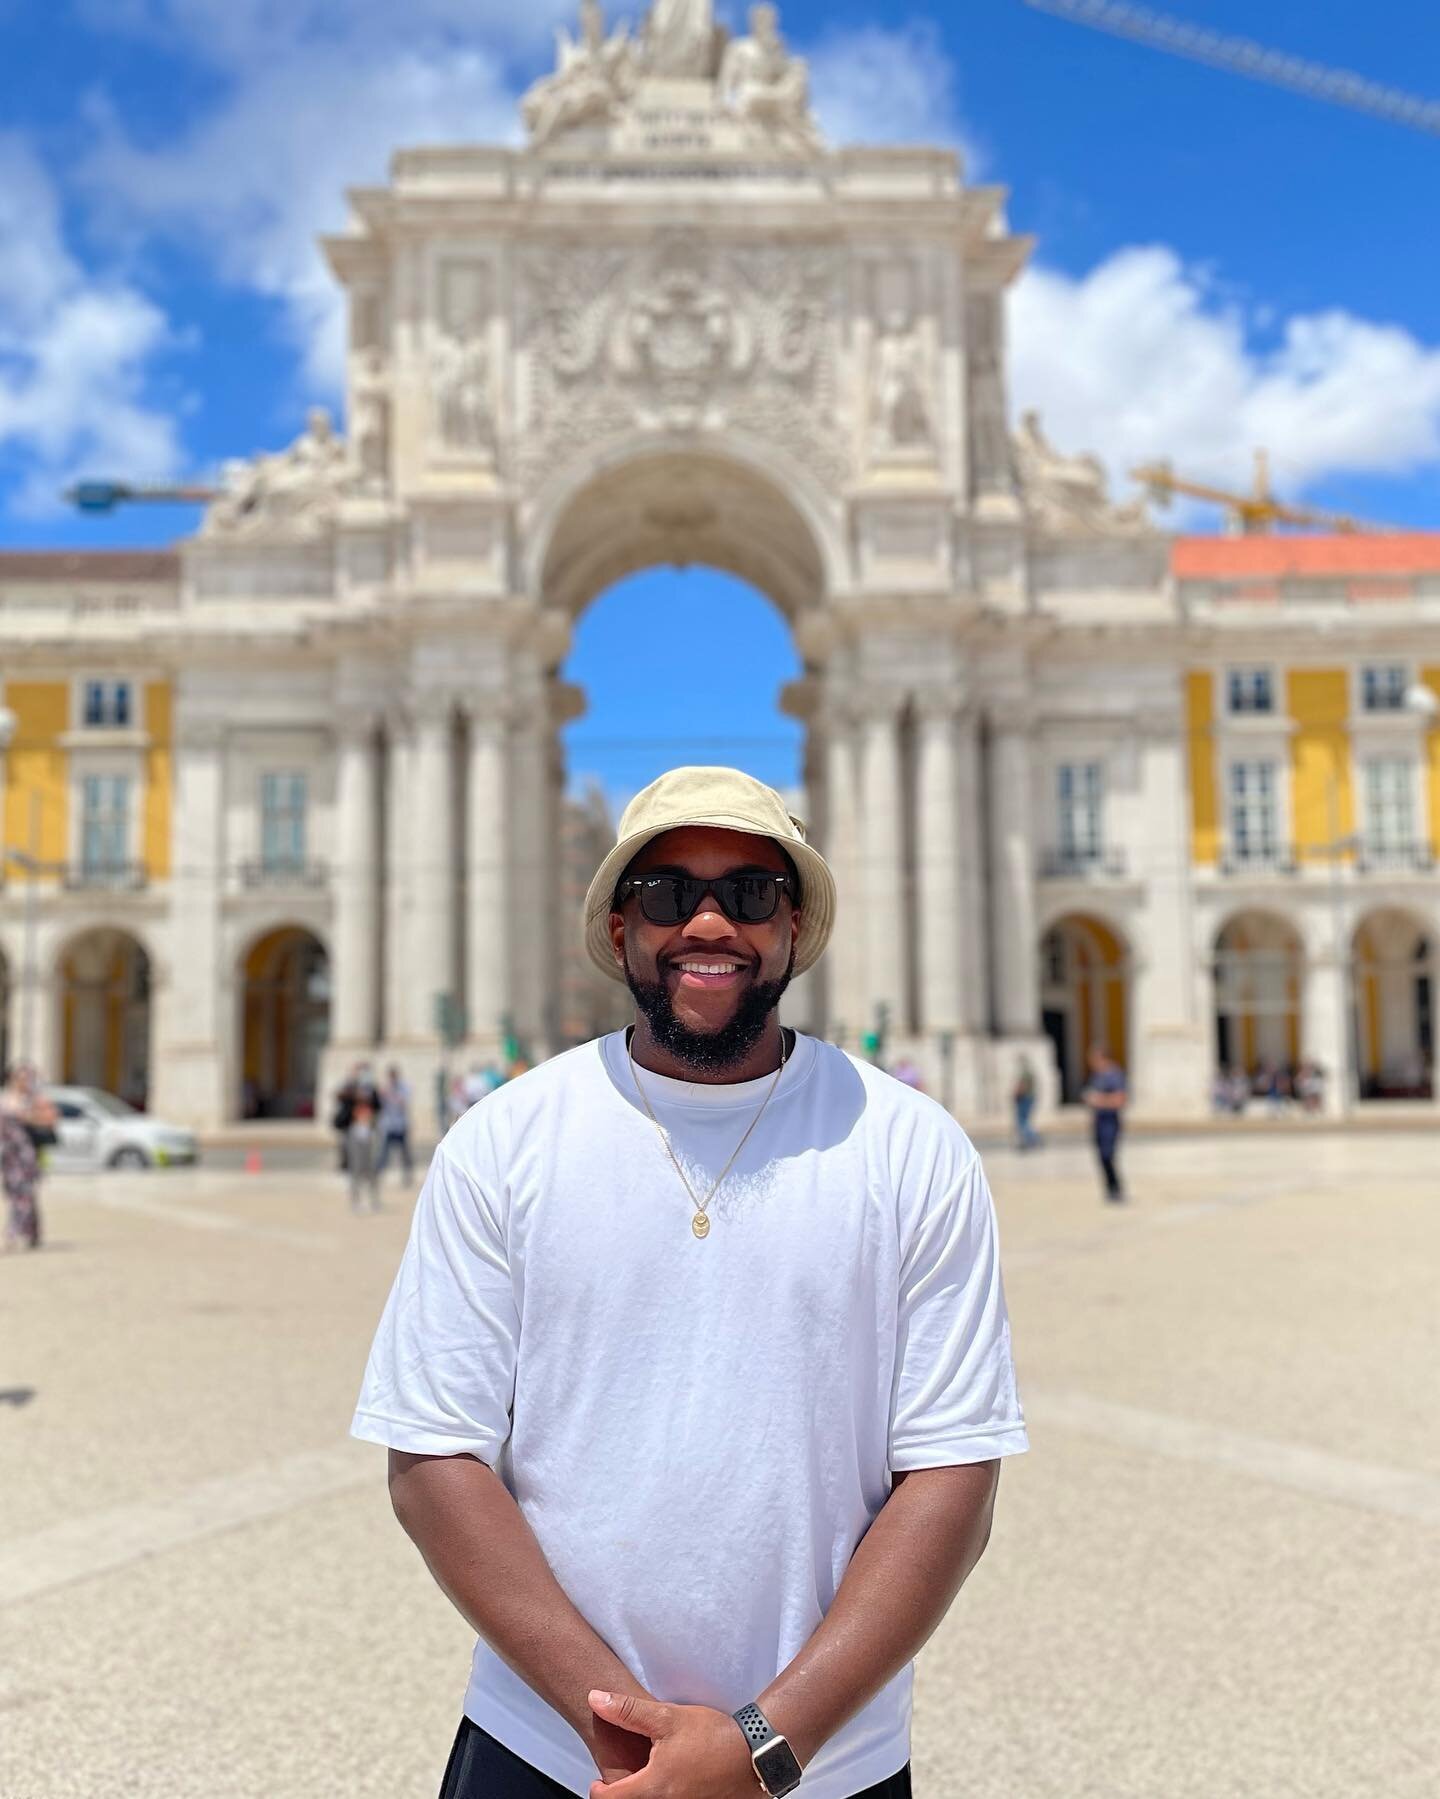 Another one down. Black is everywhere. Lisbon was good to us. But really though, who tf is Henry? 🤷🏾&zwj;♂️
&bull;
&bull;
&bull;
#TyMeetsPortugal #TyMeetsLisbon #lisbon #lisbonportugal🇵🇹 #lisboa🇵🇹 #TravelingNegus #WhoTFisHenry #HenryWasLiterall